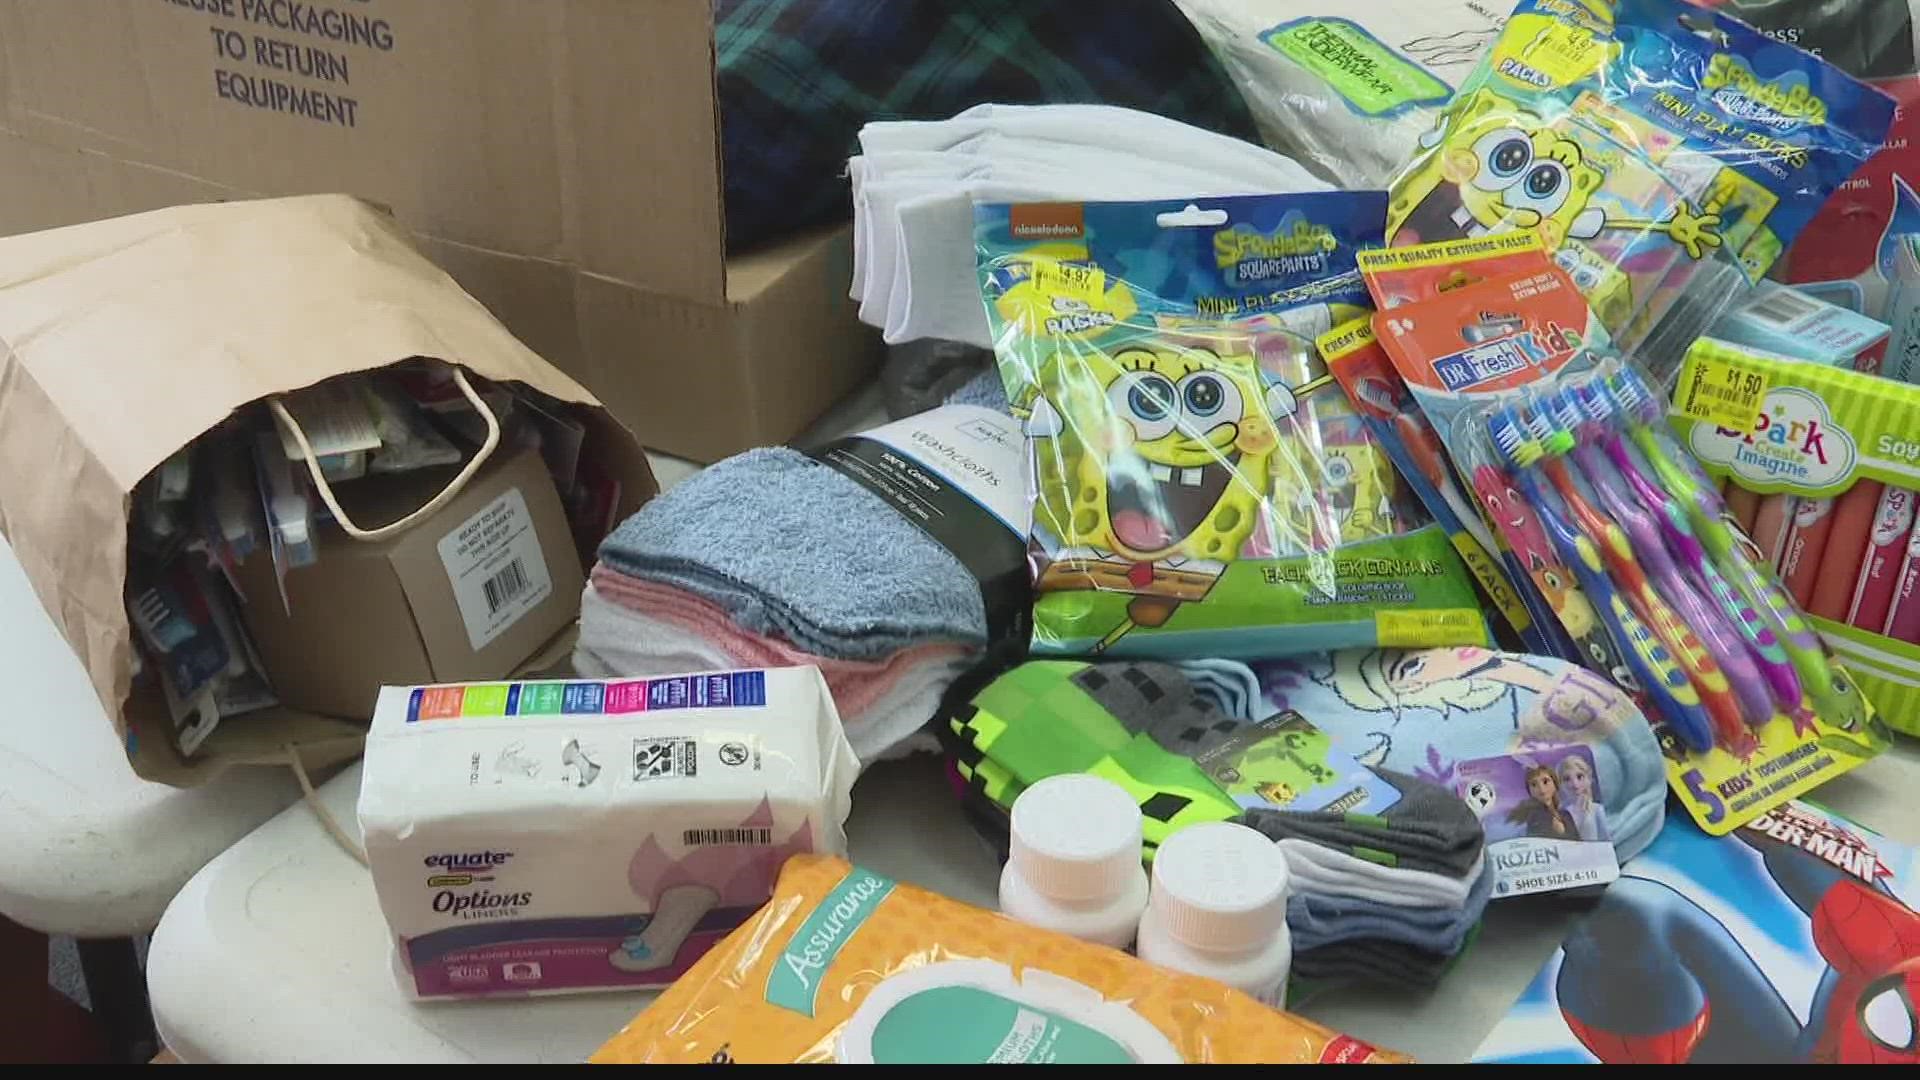 Two Indiana nursing homes are gathering donations to send to those impacted by the Russian invasion of Ukraine.